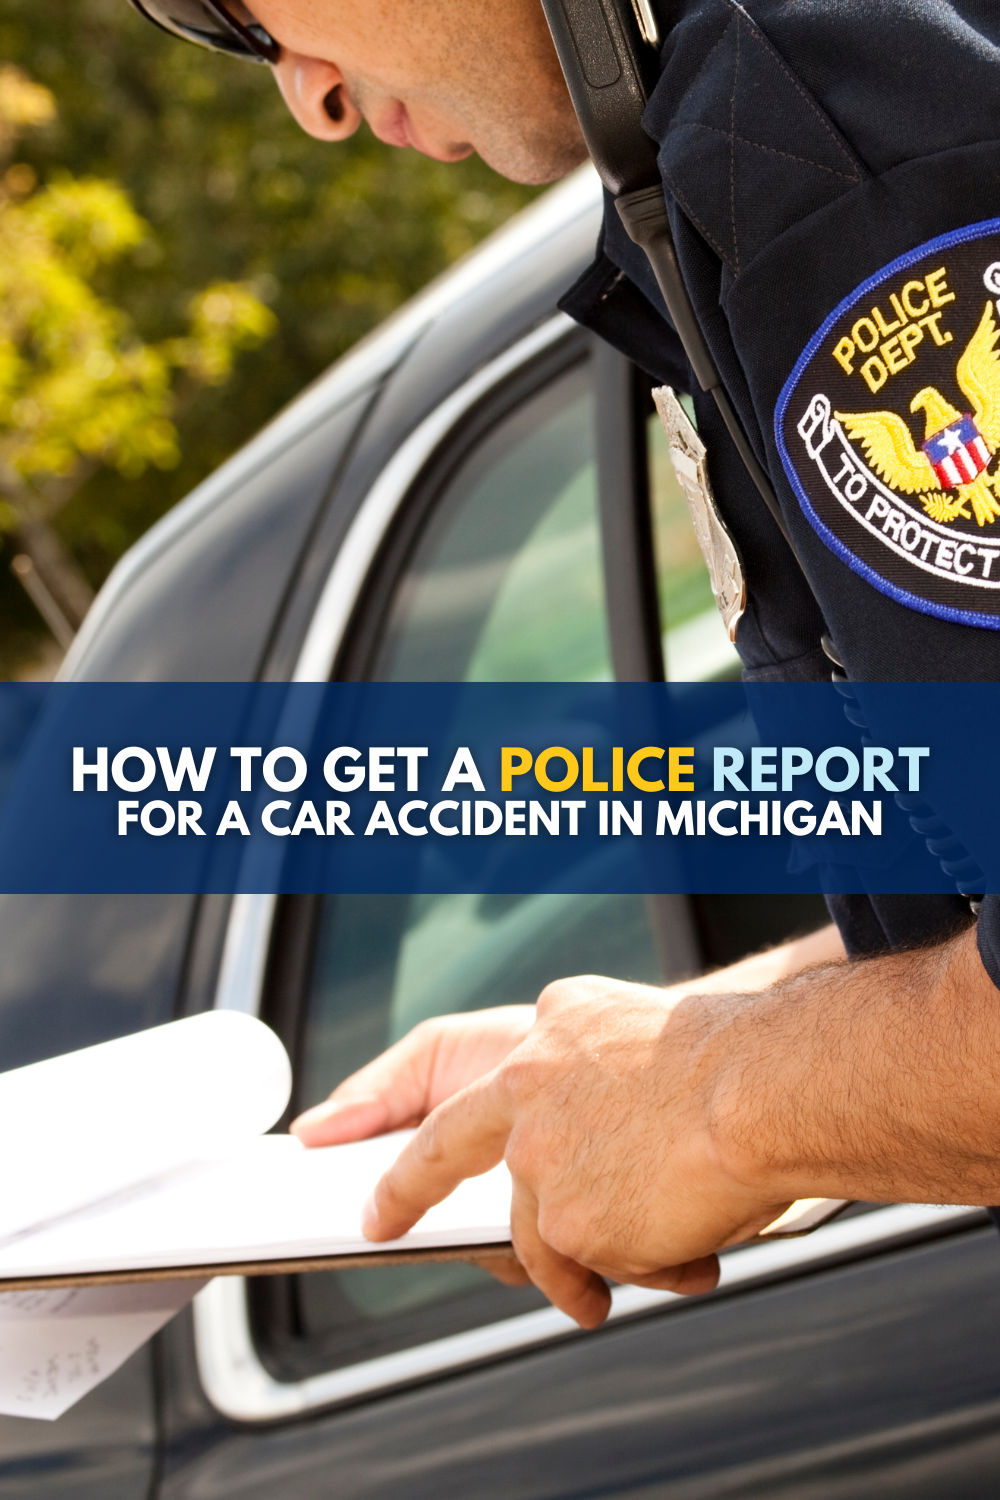 How To Get A Police Report For A Car Accident In Michigan